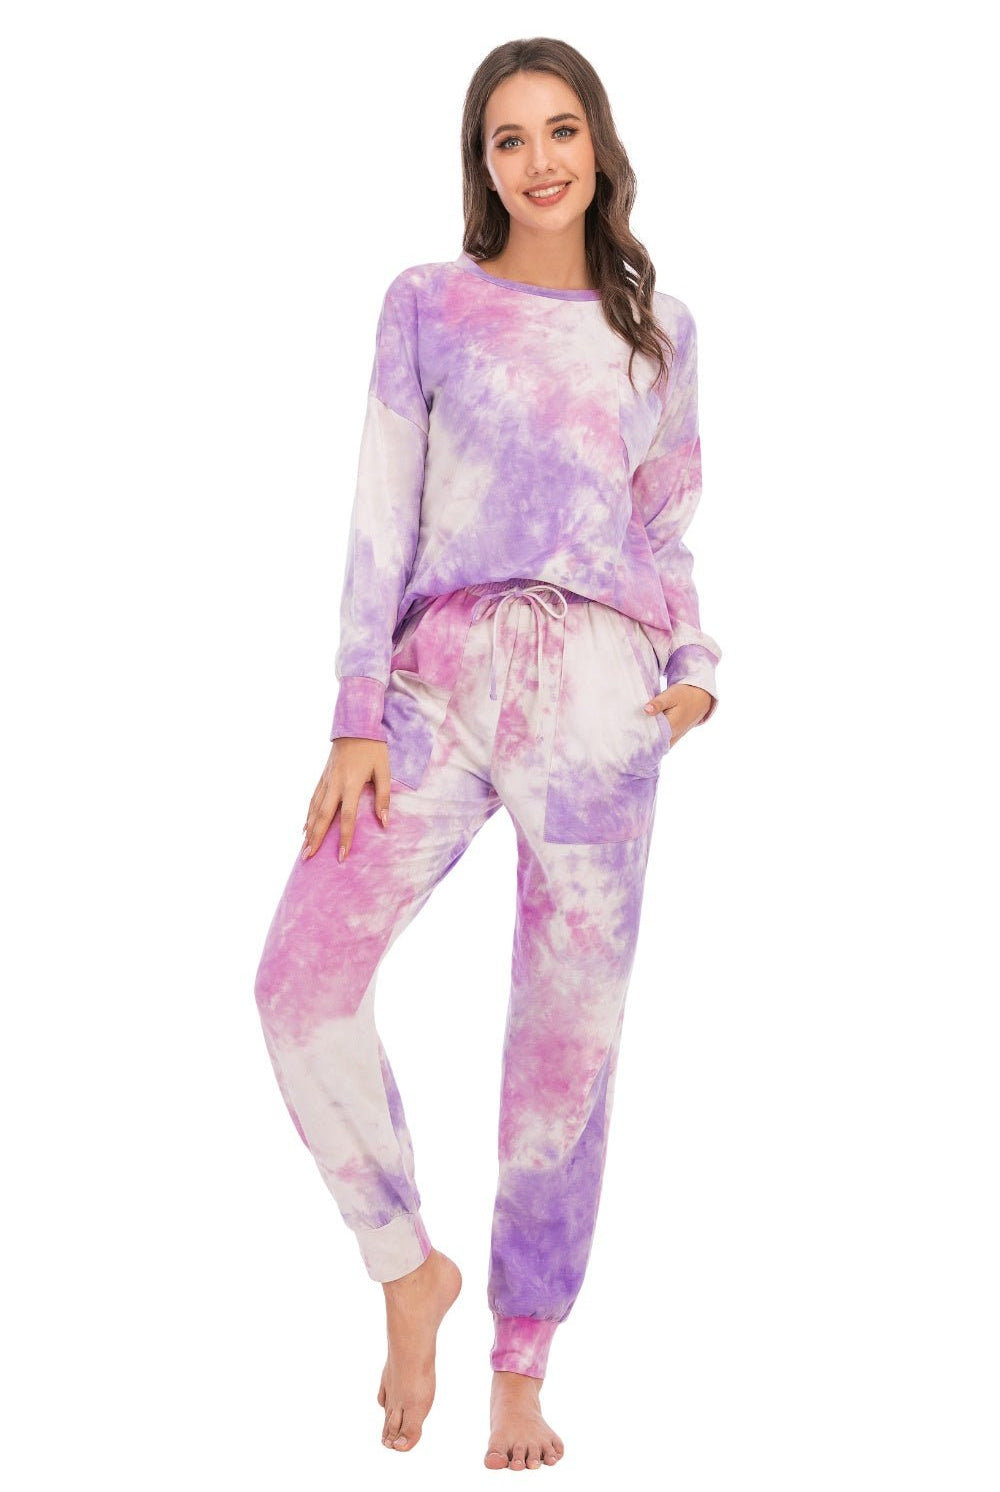 Tie-Dye Top and Pants Lounge Set - GemThreads Boutique